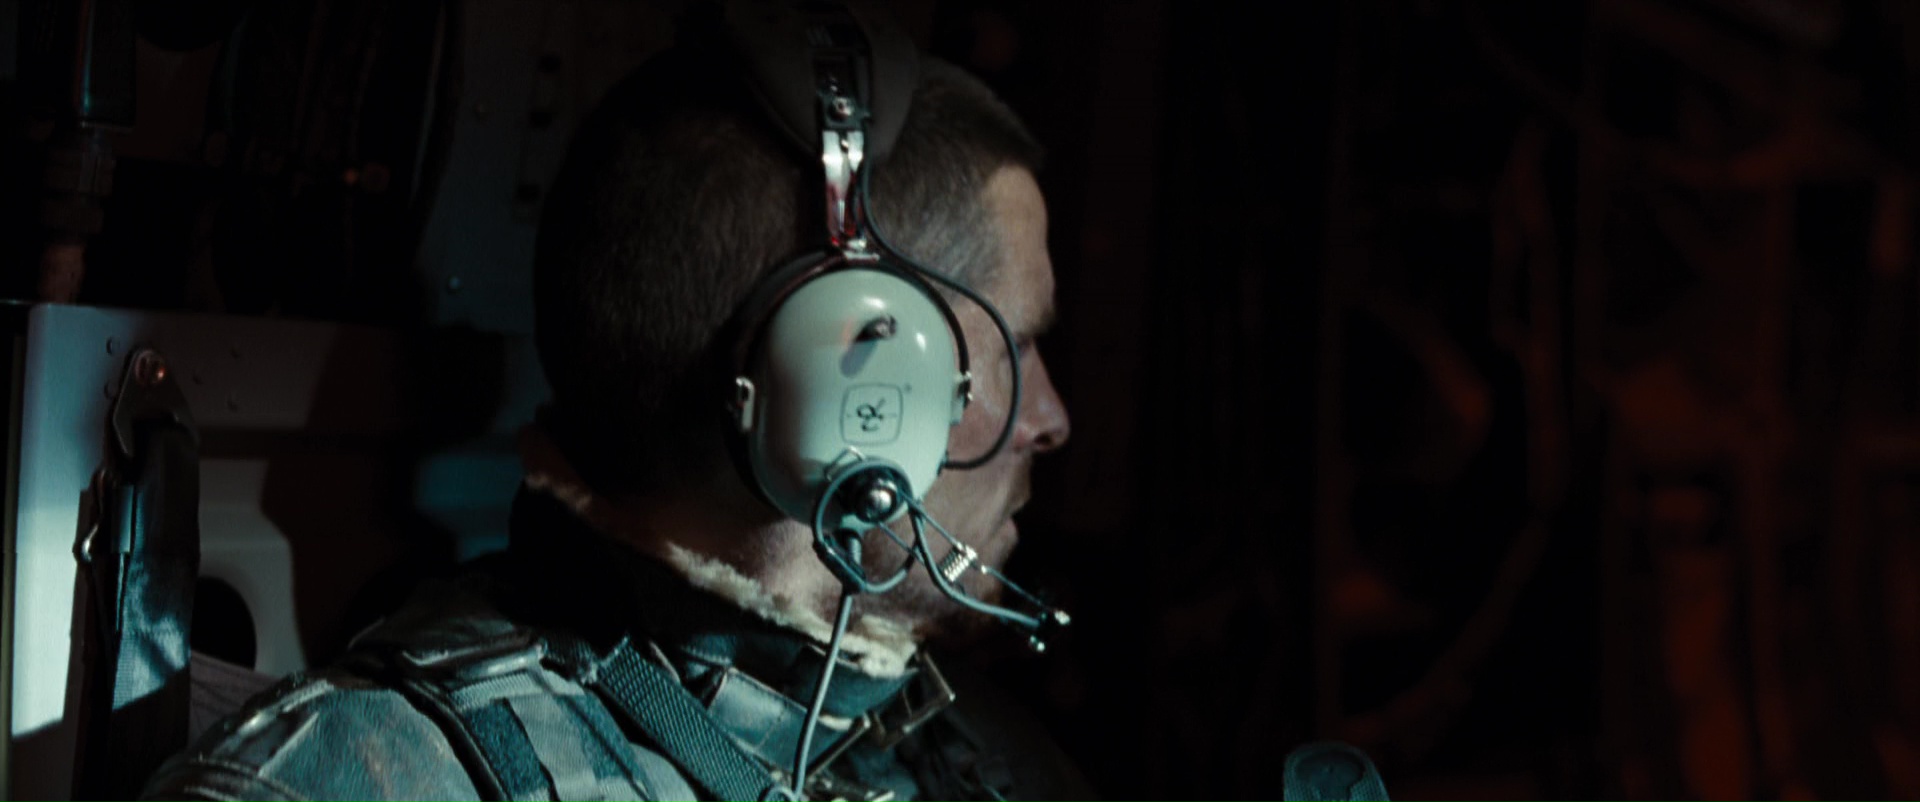 David Clark Headsets Used by Christian Bale (John Connor 